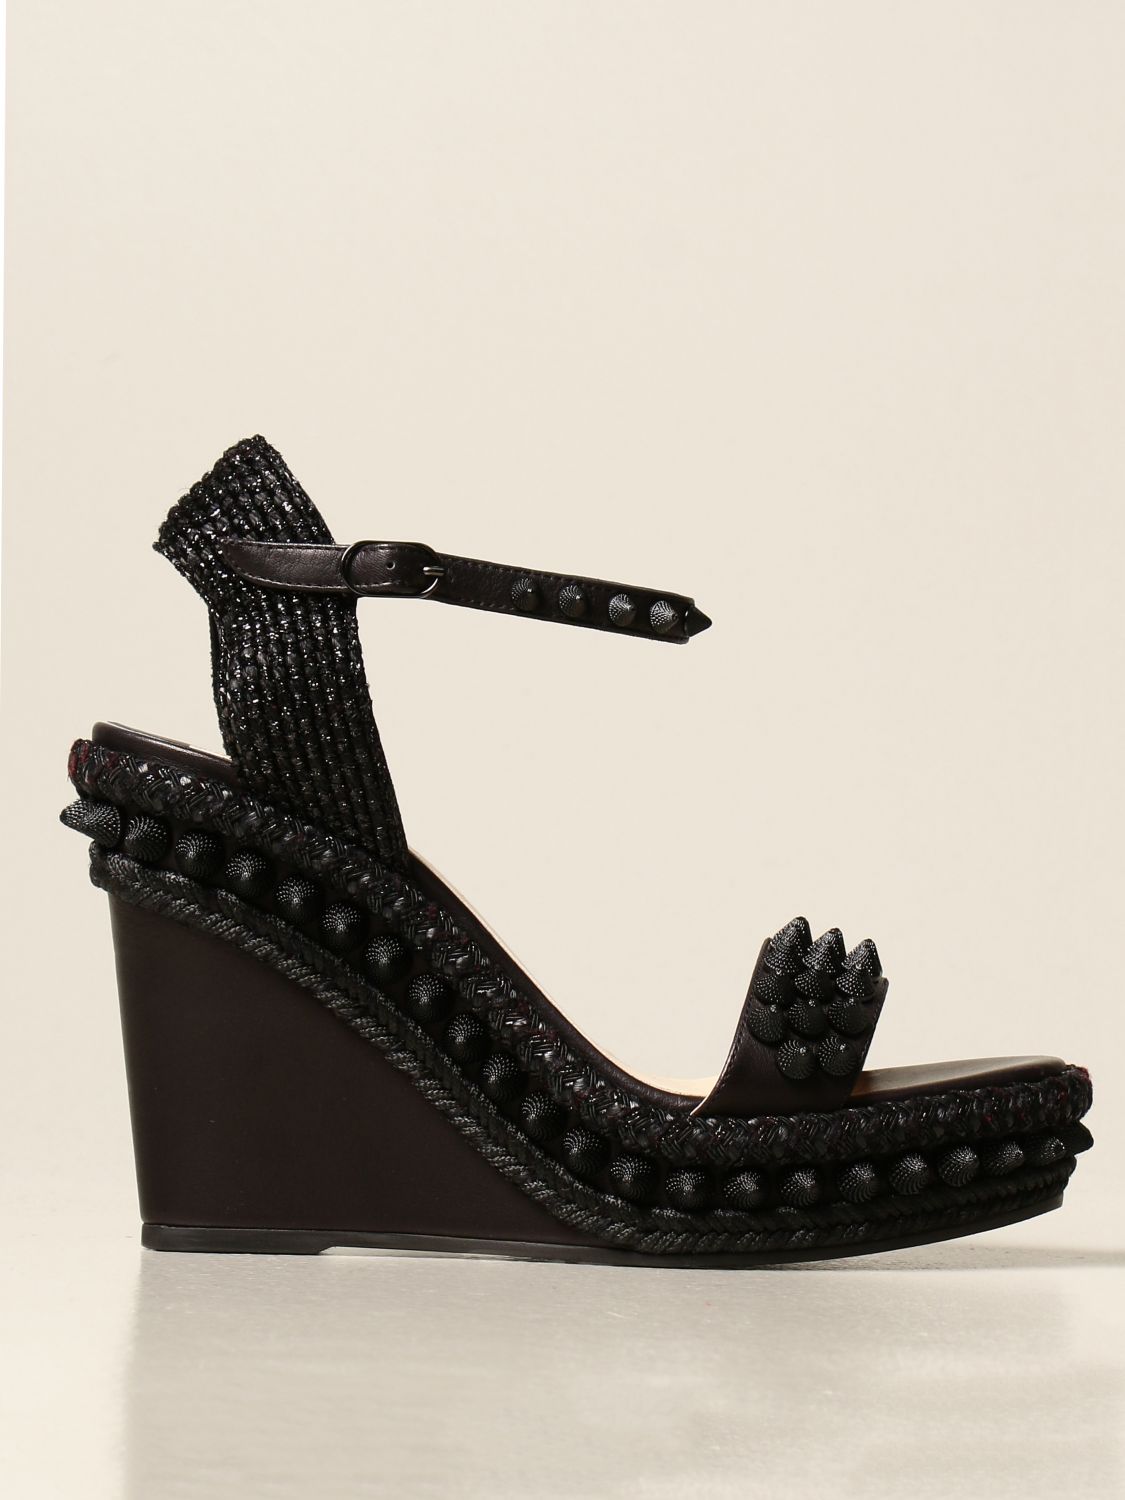 CHRISTIAN LOUBOUTIN: wedge sandal Lata in raffia leather with studs Black | Christian Louboutin wedge 3200174 online GIGLIO.COM